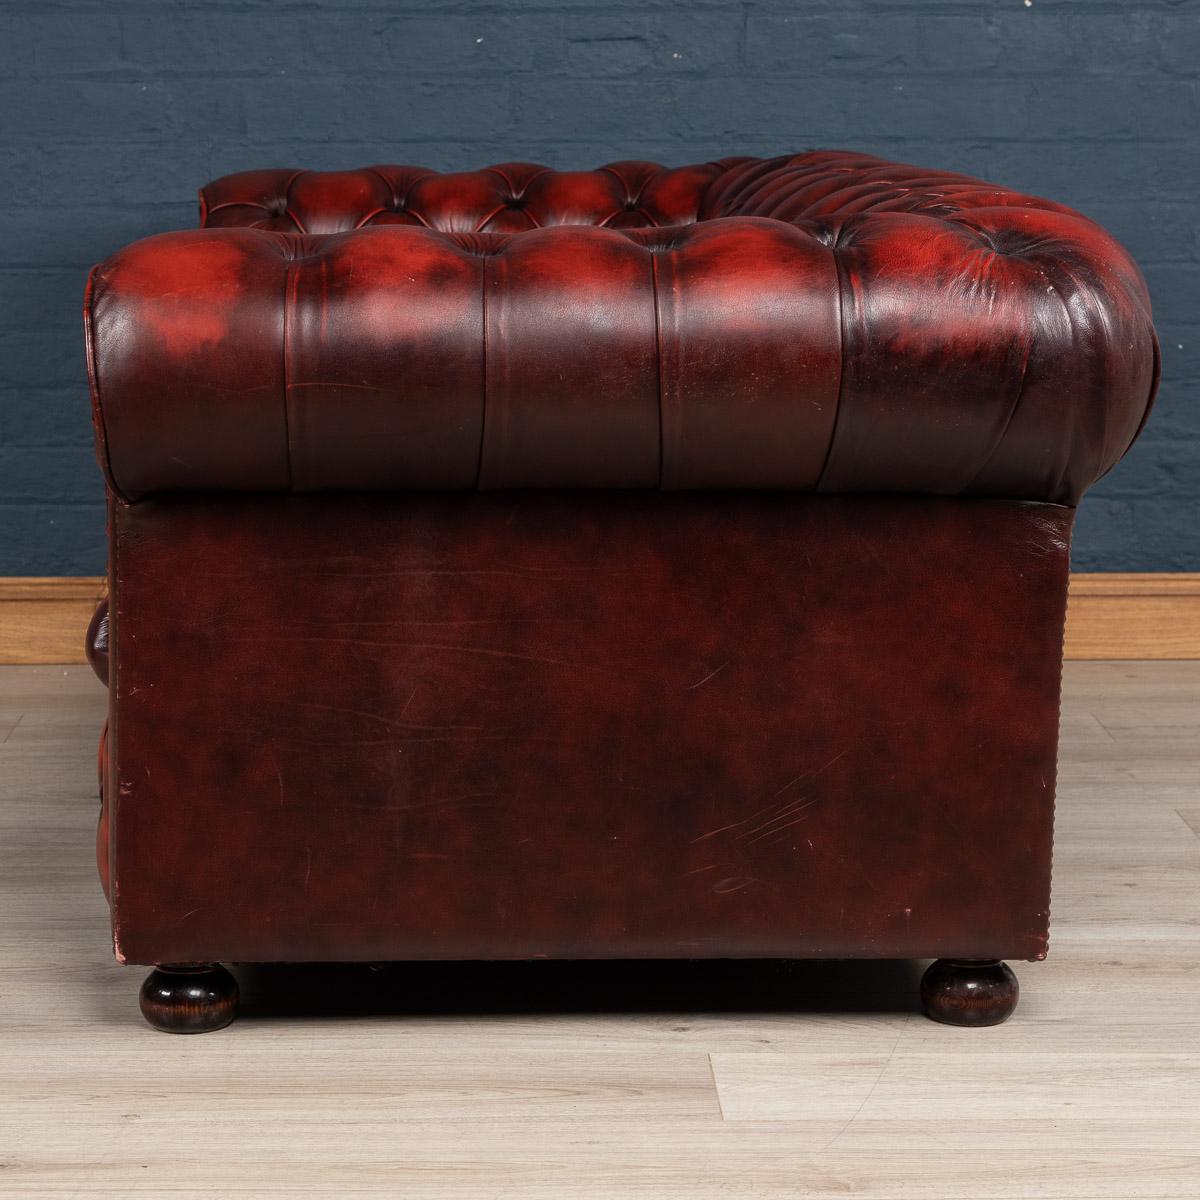 Superb late 20th century leather Chesterfield sofa. One of the most elegant models with button down seating, this is a fashionable evergreen capable of uplifting the interior space of any contemporary or traditional home, the Classic colour